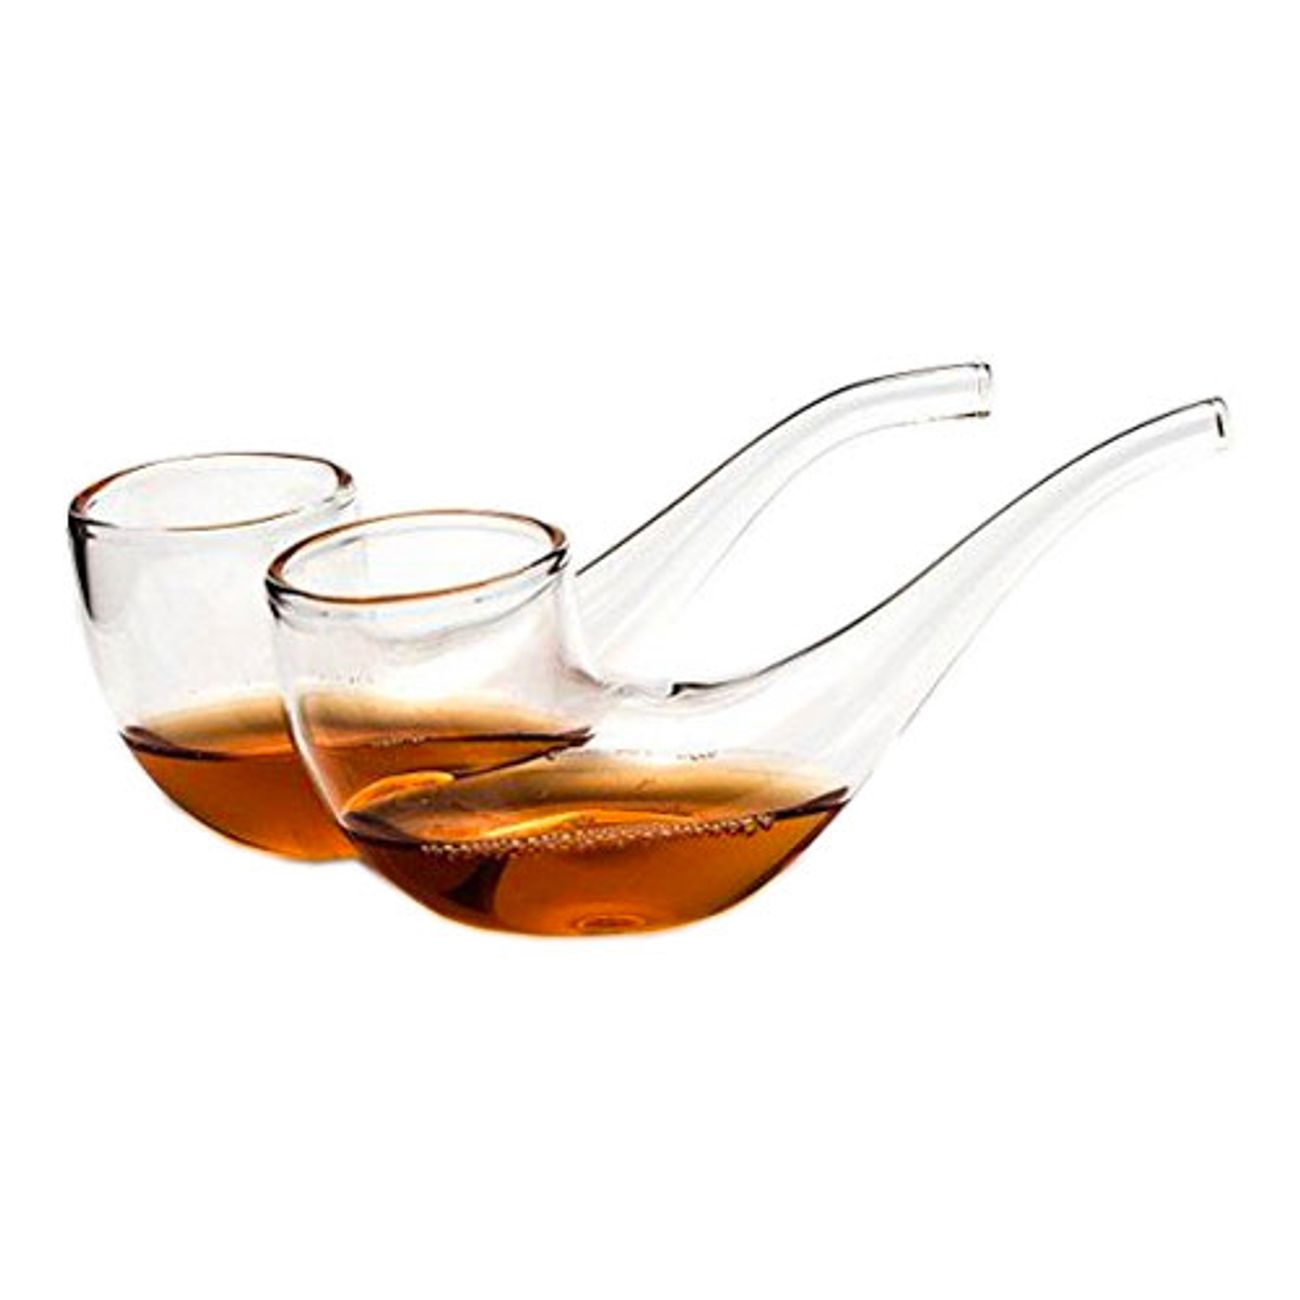 vinology-pipe-sippers-1